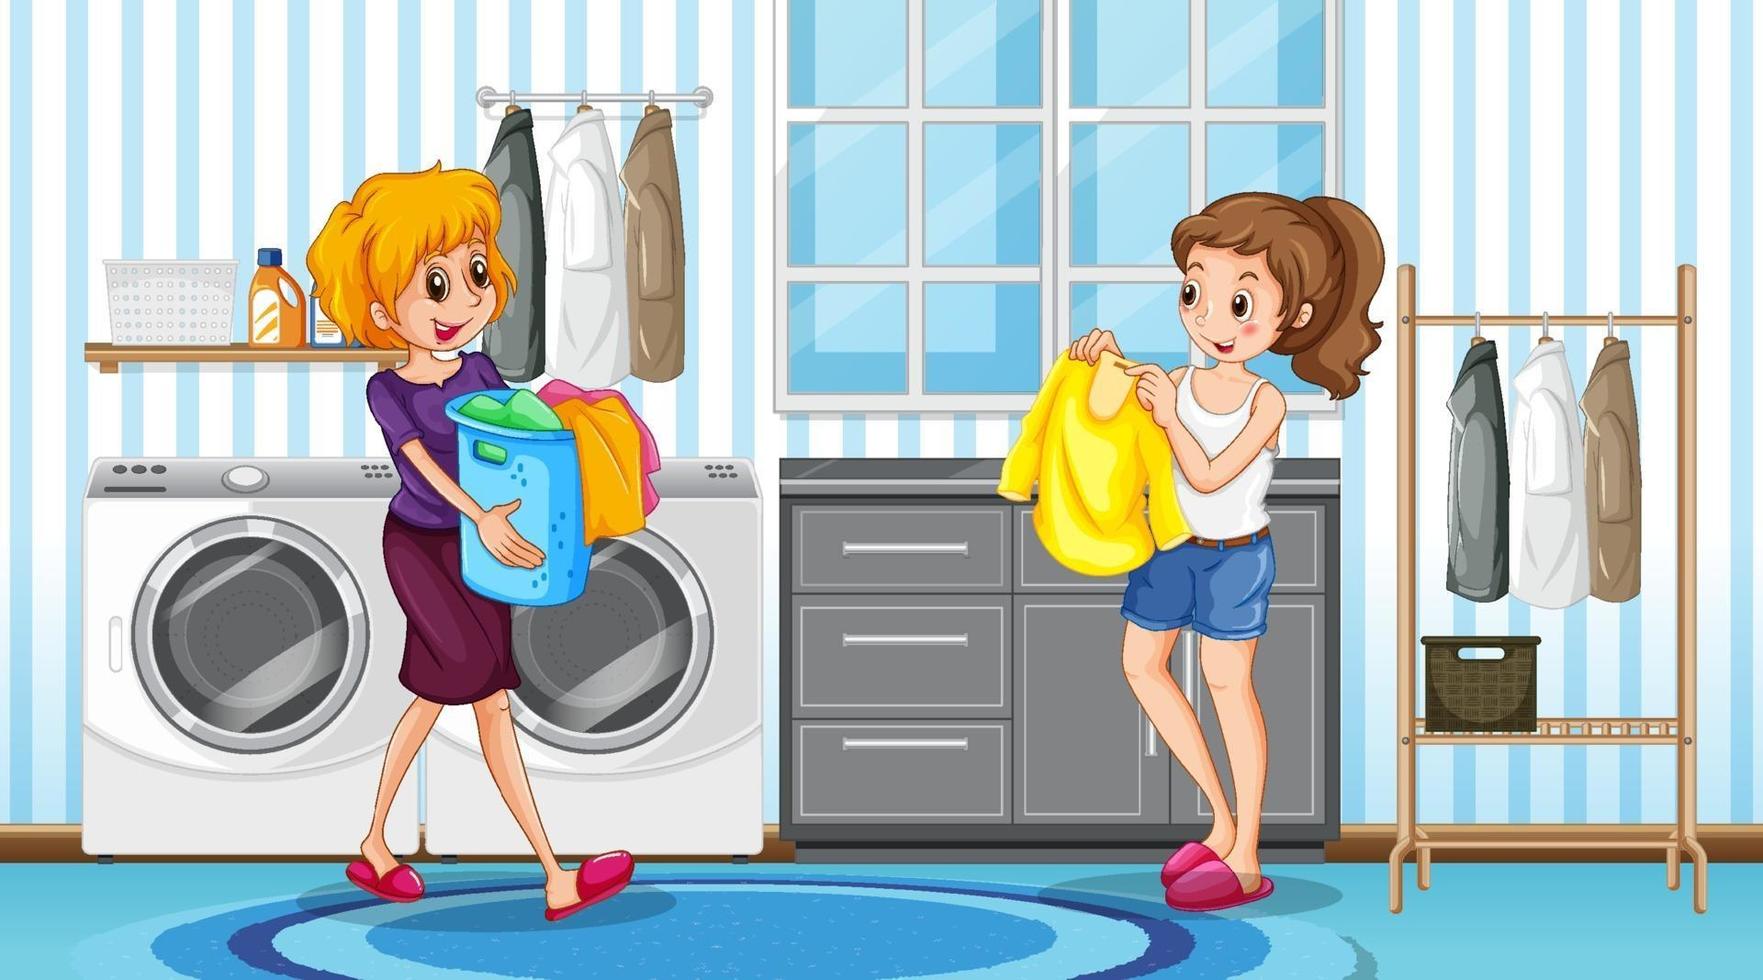 Scene with two women in laundry room vector